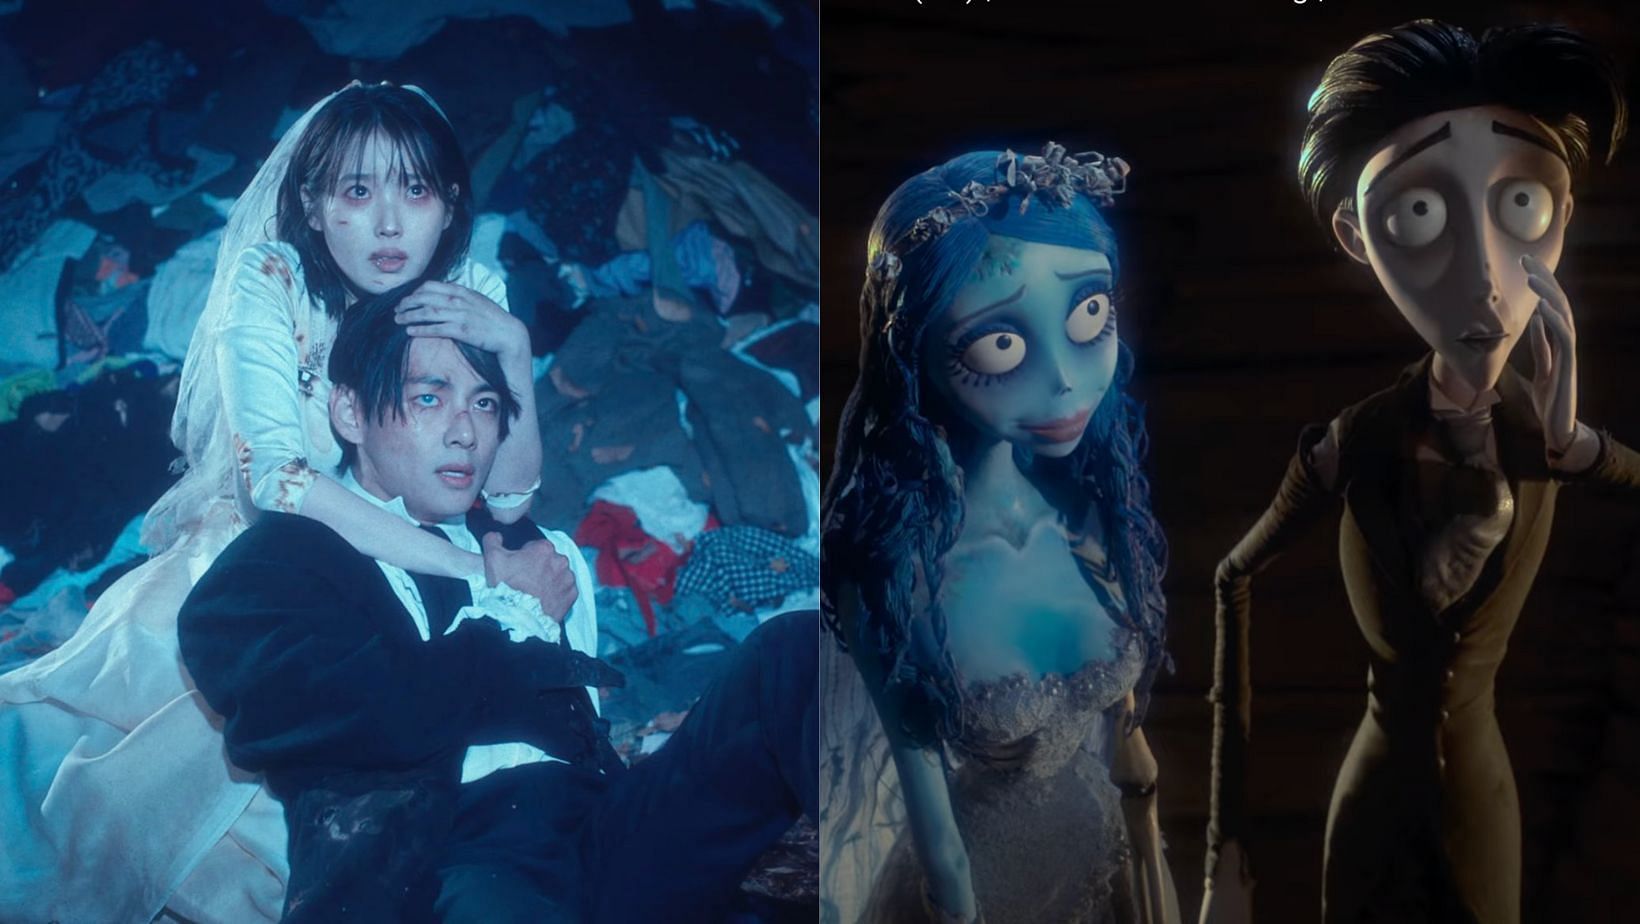 Fans draw parallels of IU